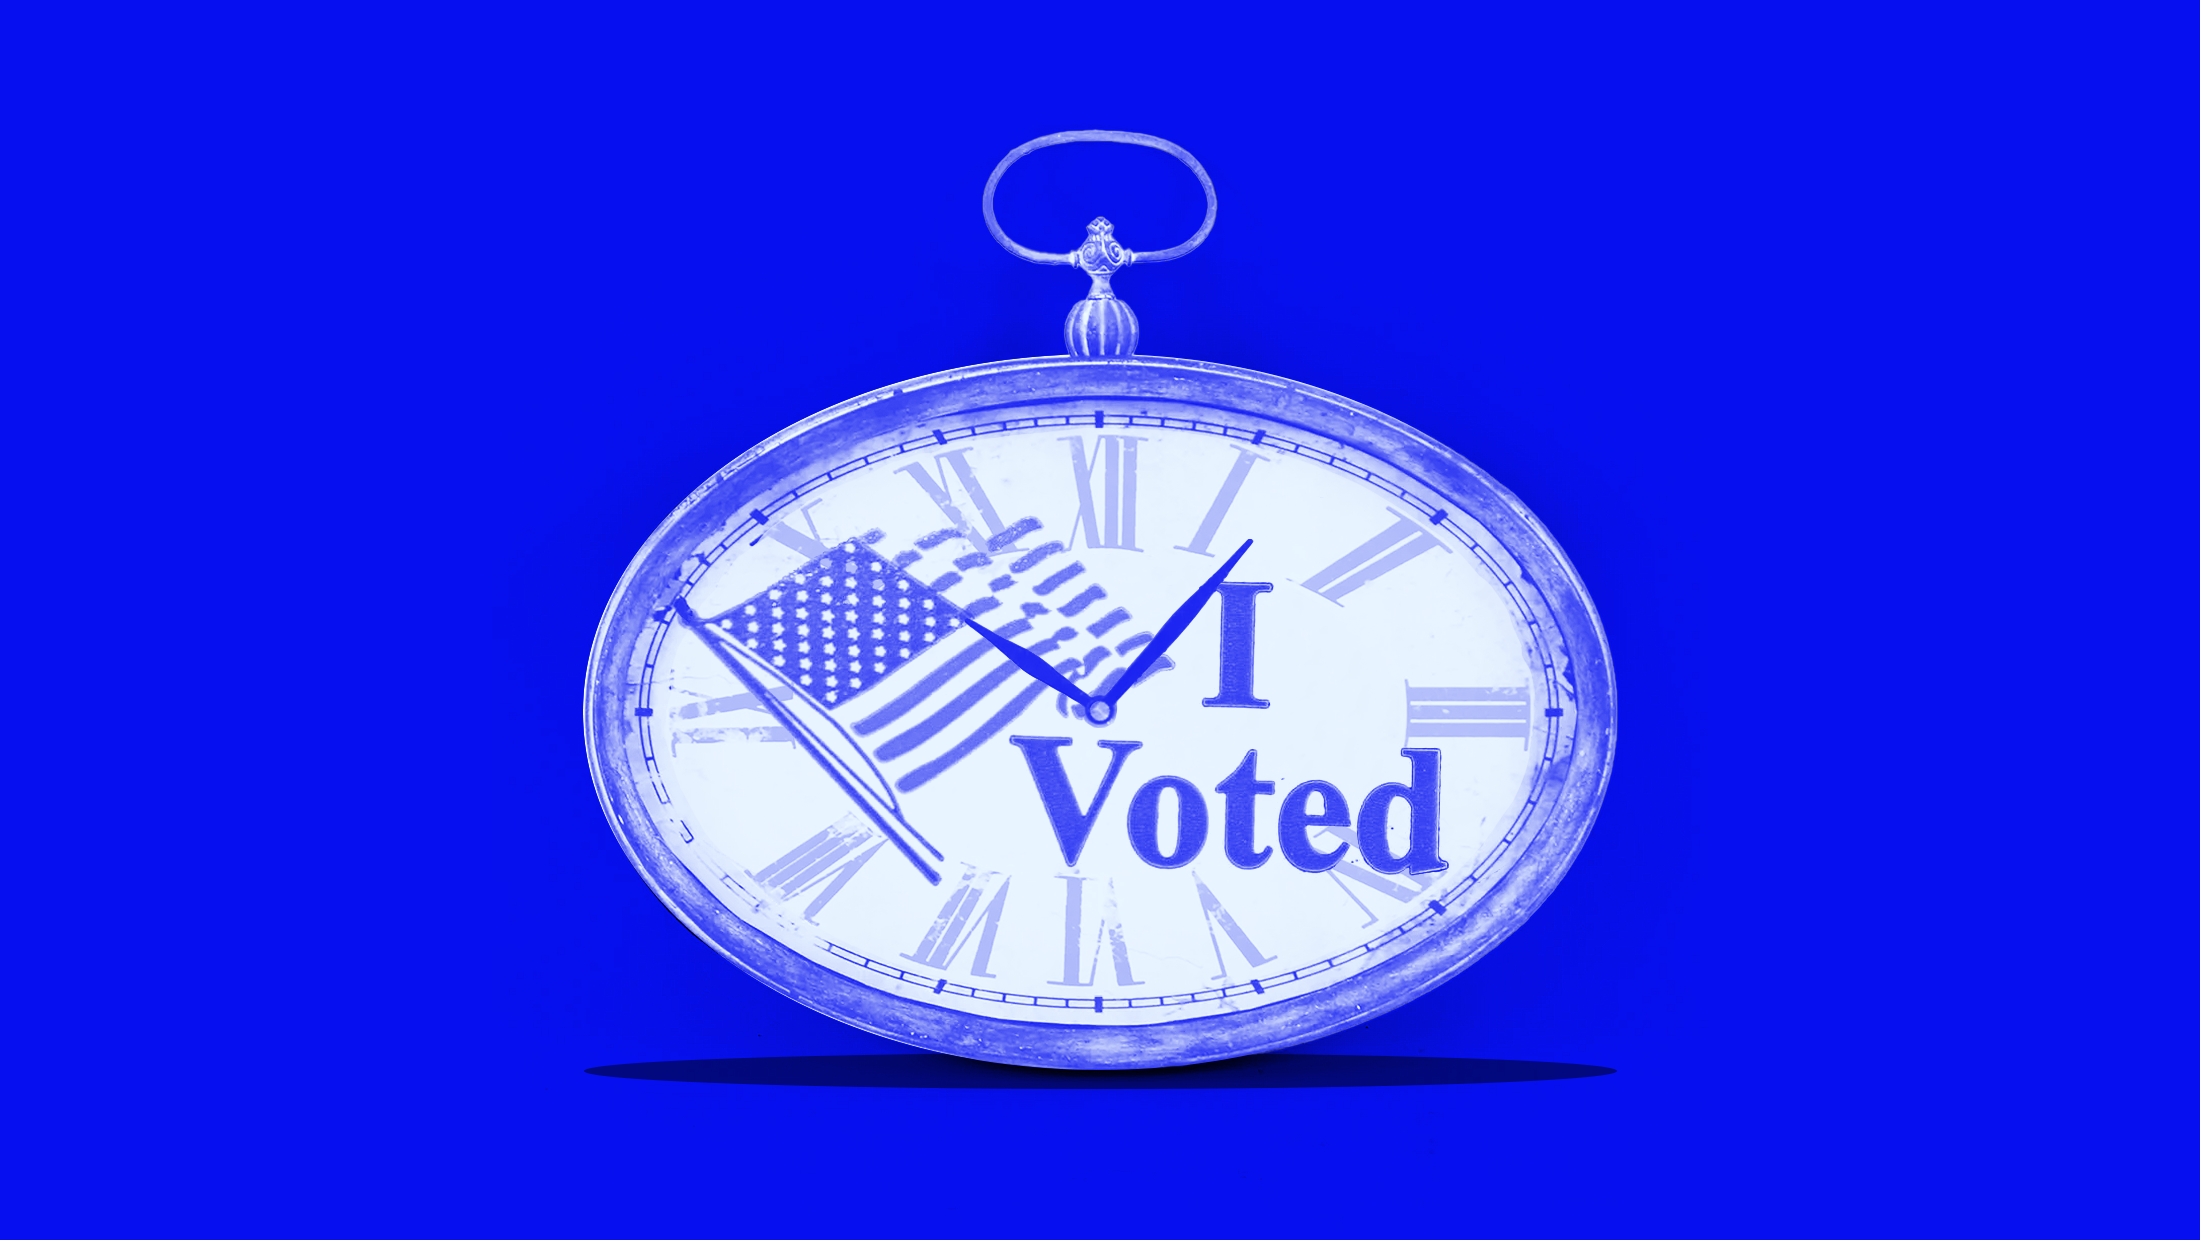 Clock with an "I Voted" sticker and American flag on a blue background.